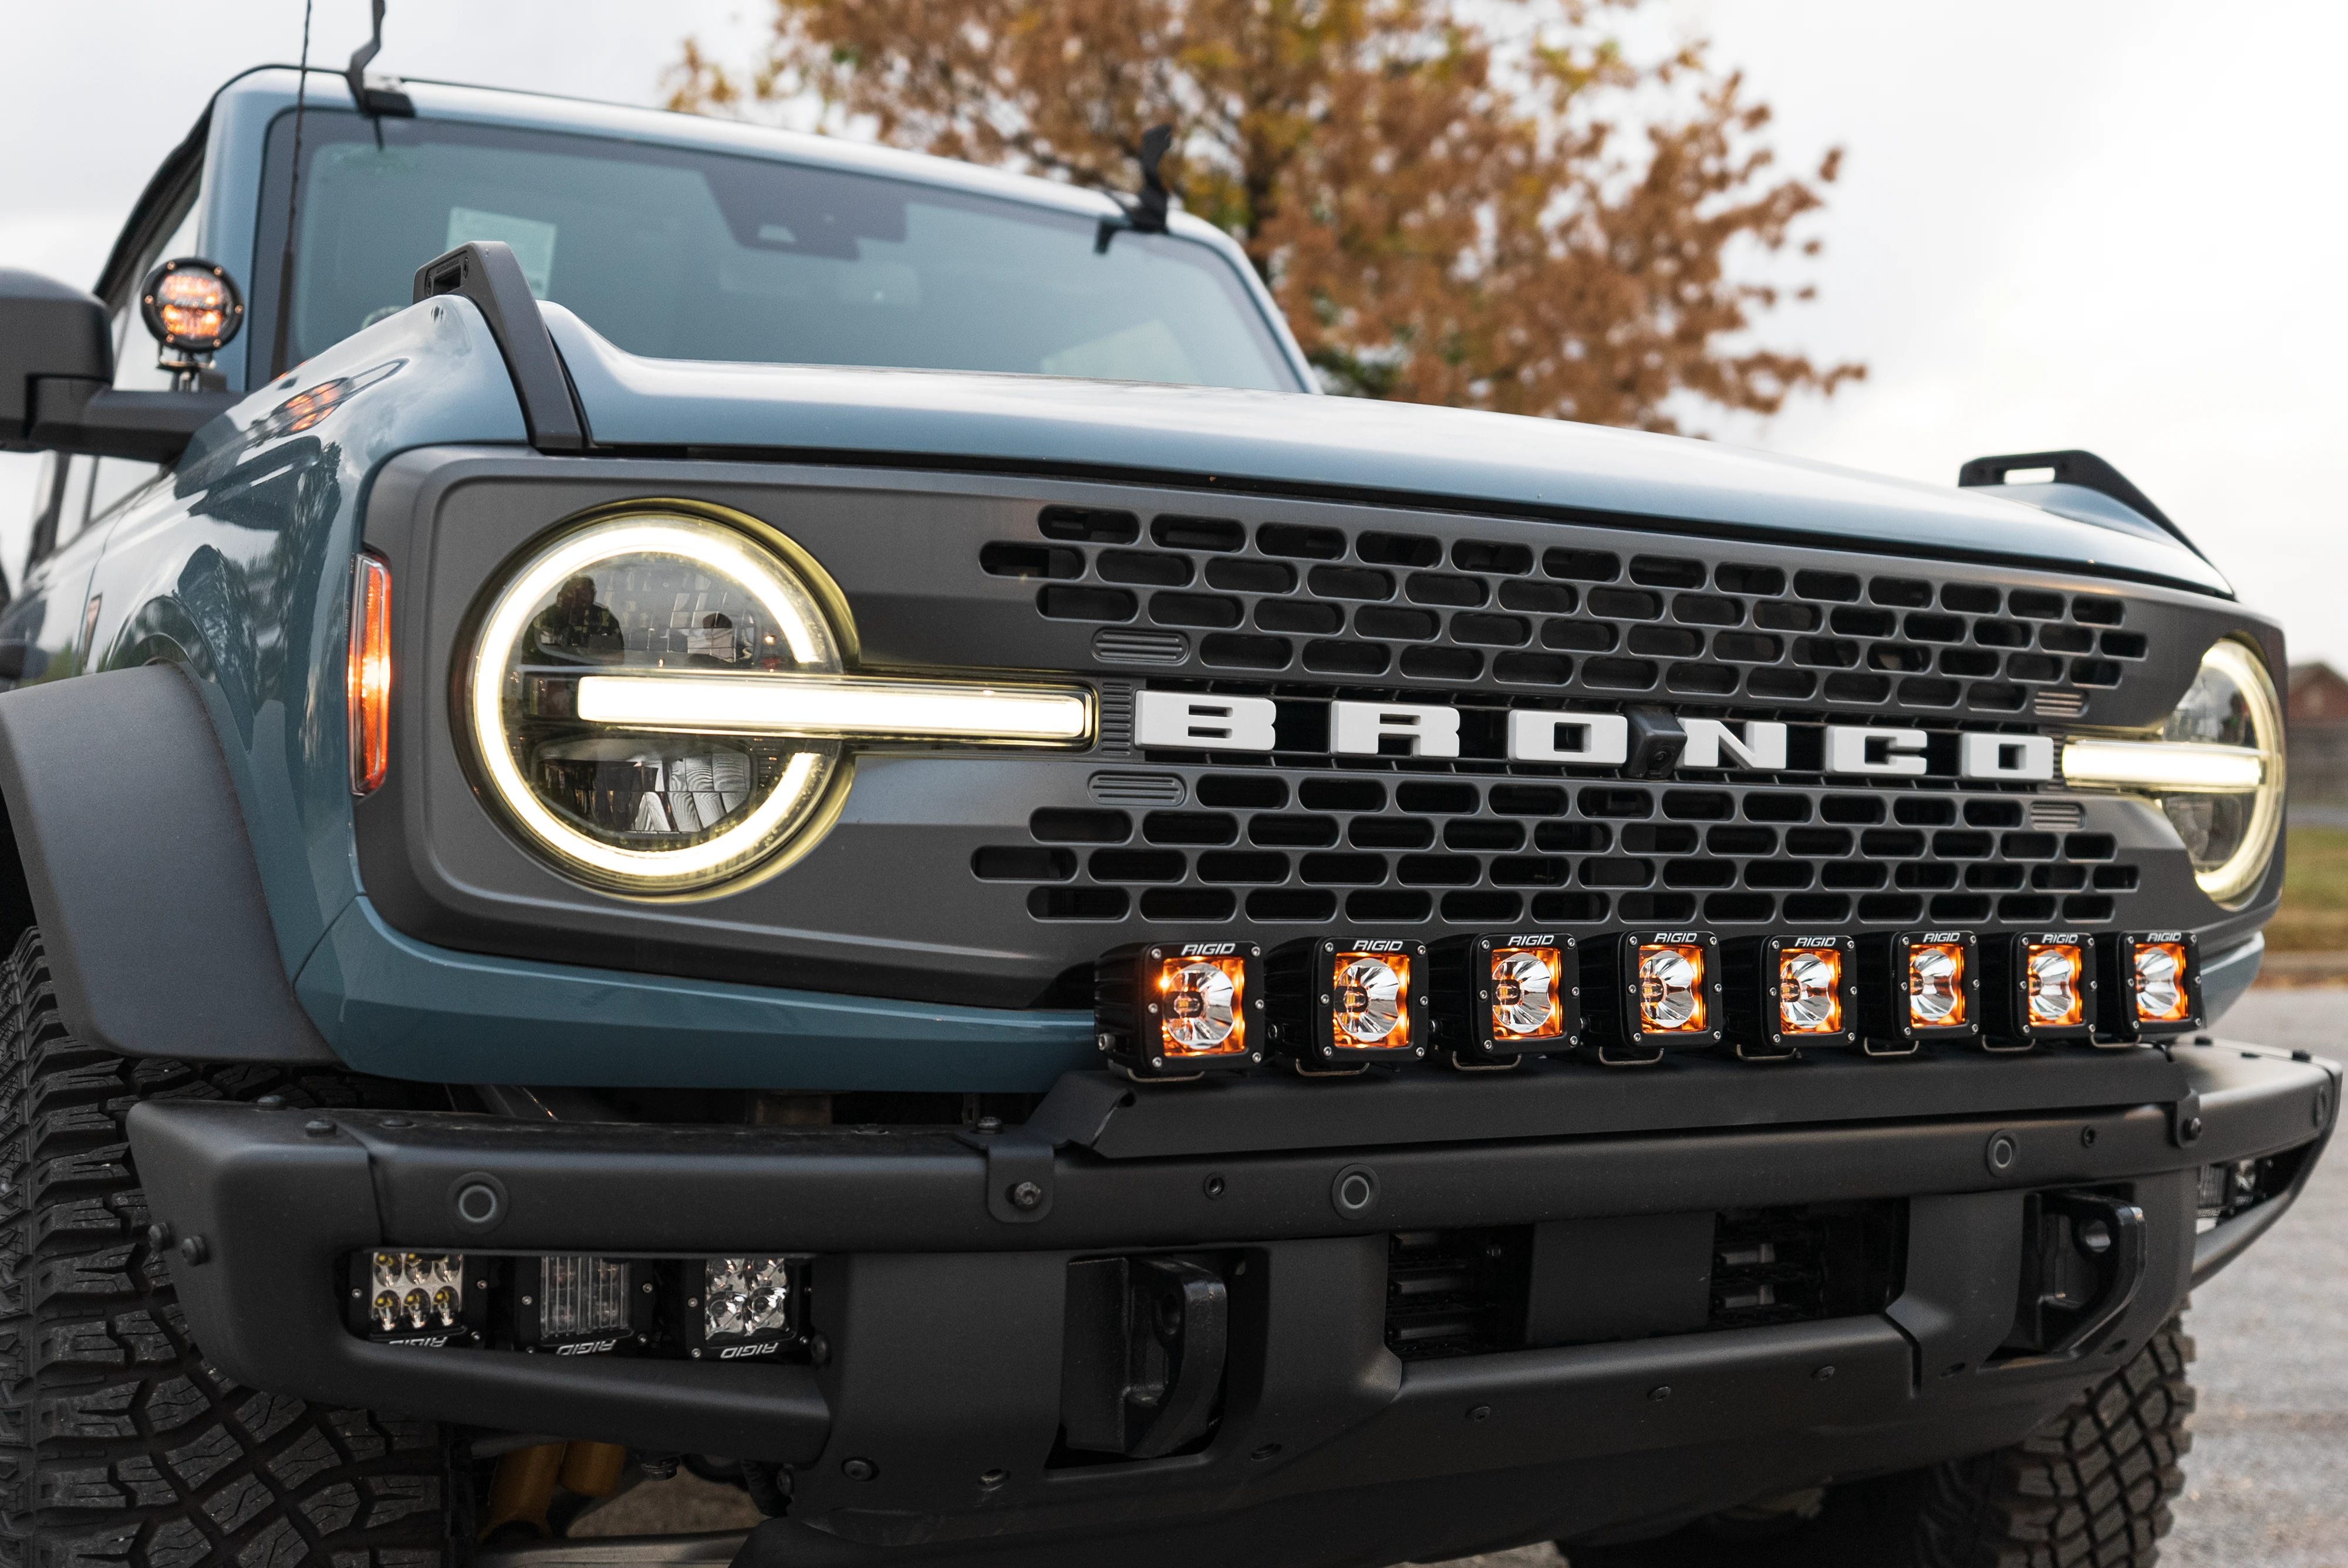 SPV Parts 2021+ Ford Bronco Modular Bumper Universal Slotted Cross Mount Kit (Fits MANY lights)